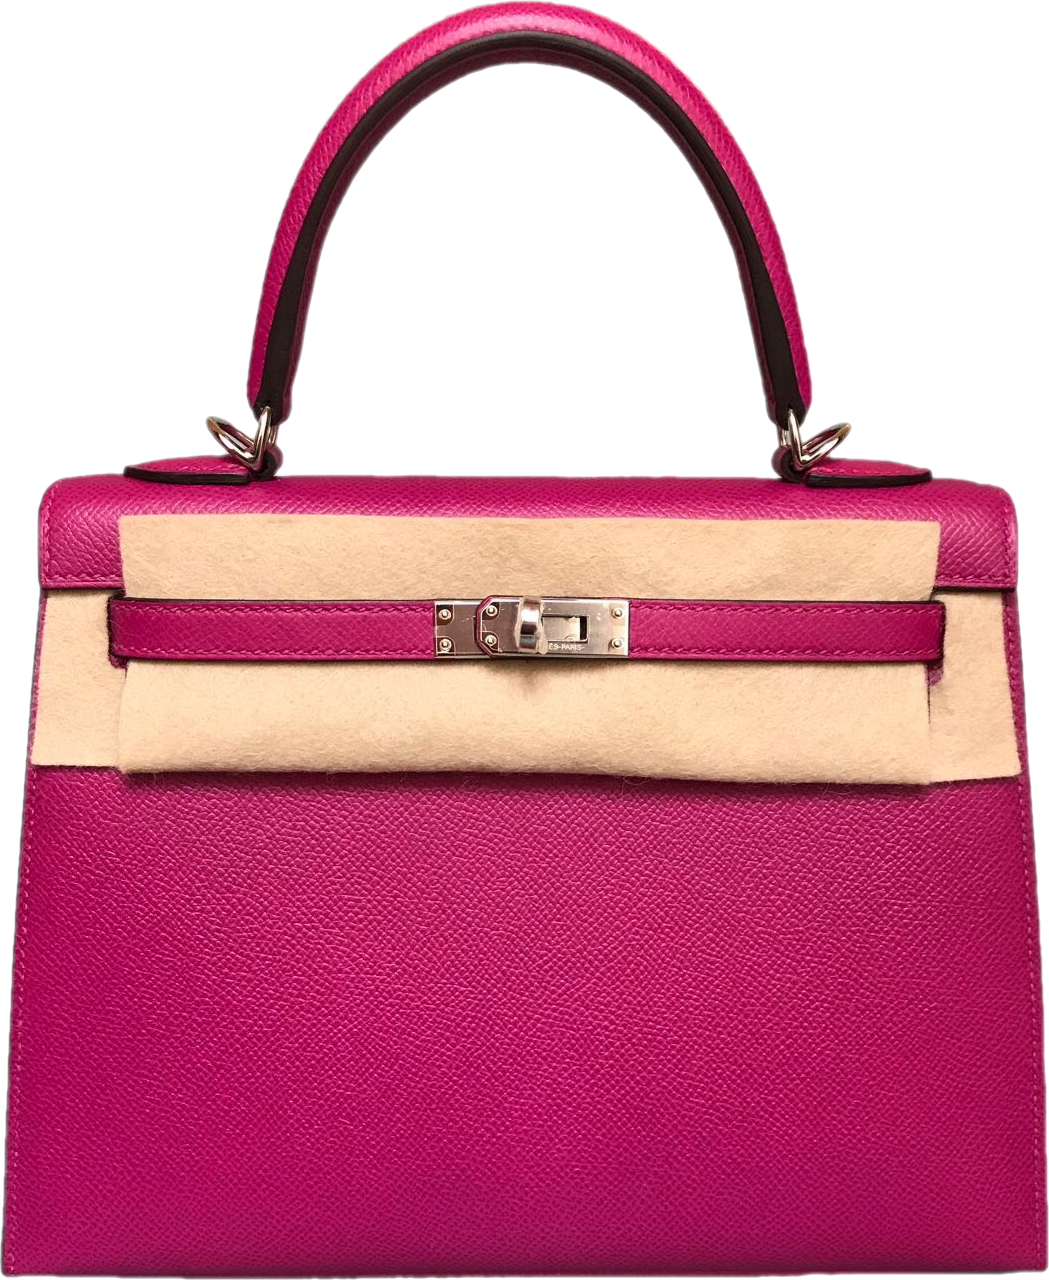 Kelly Purse PNG HD Isolated